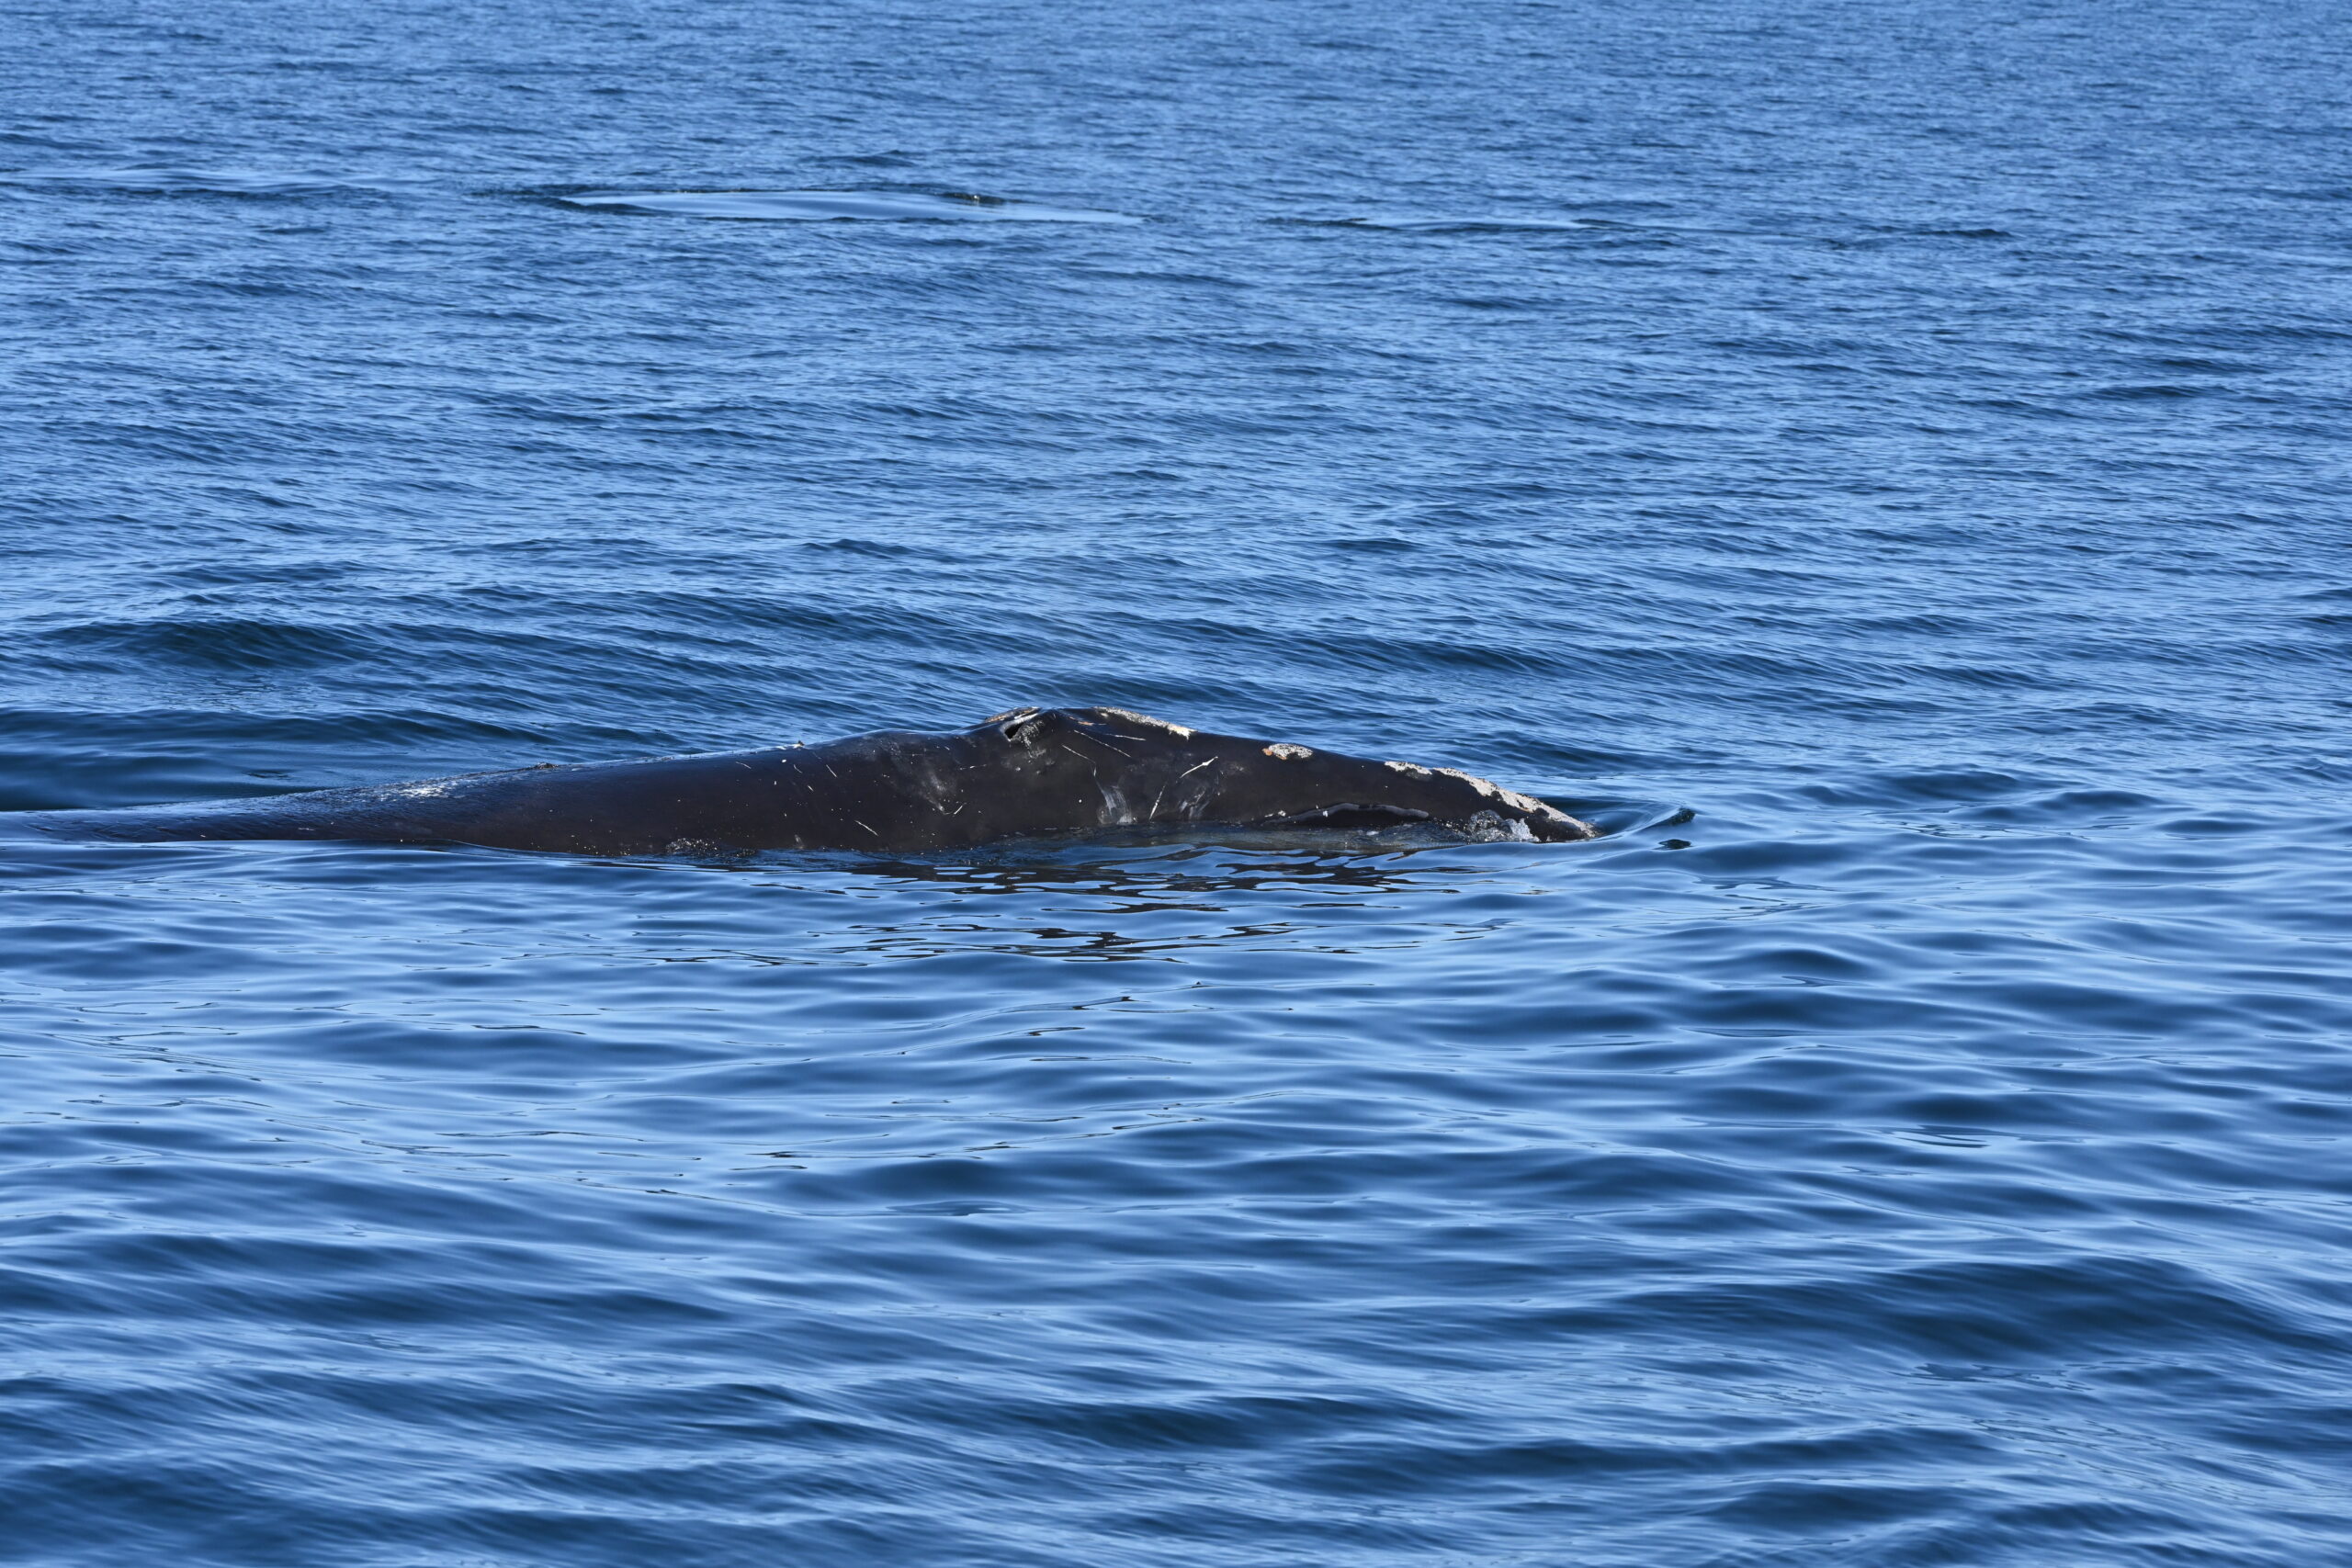 North Atlantic right whale "Shelagh"